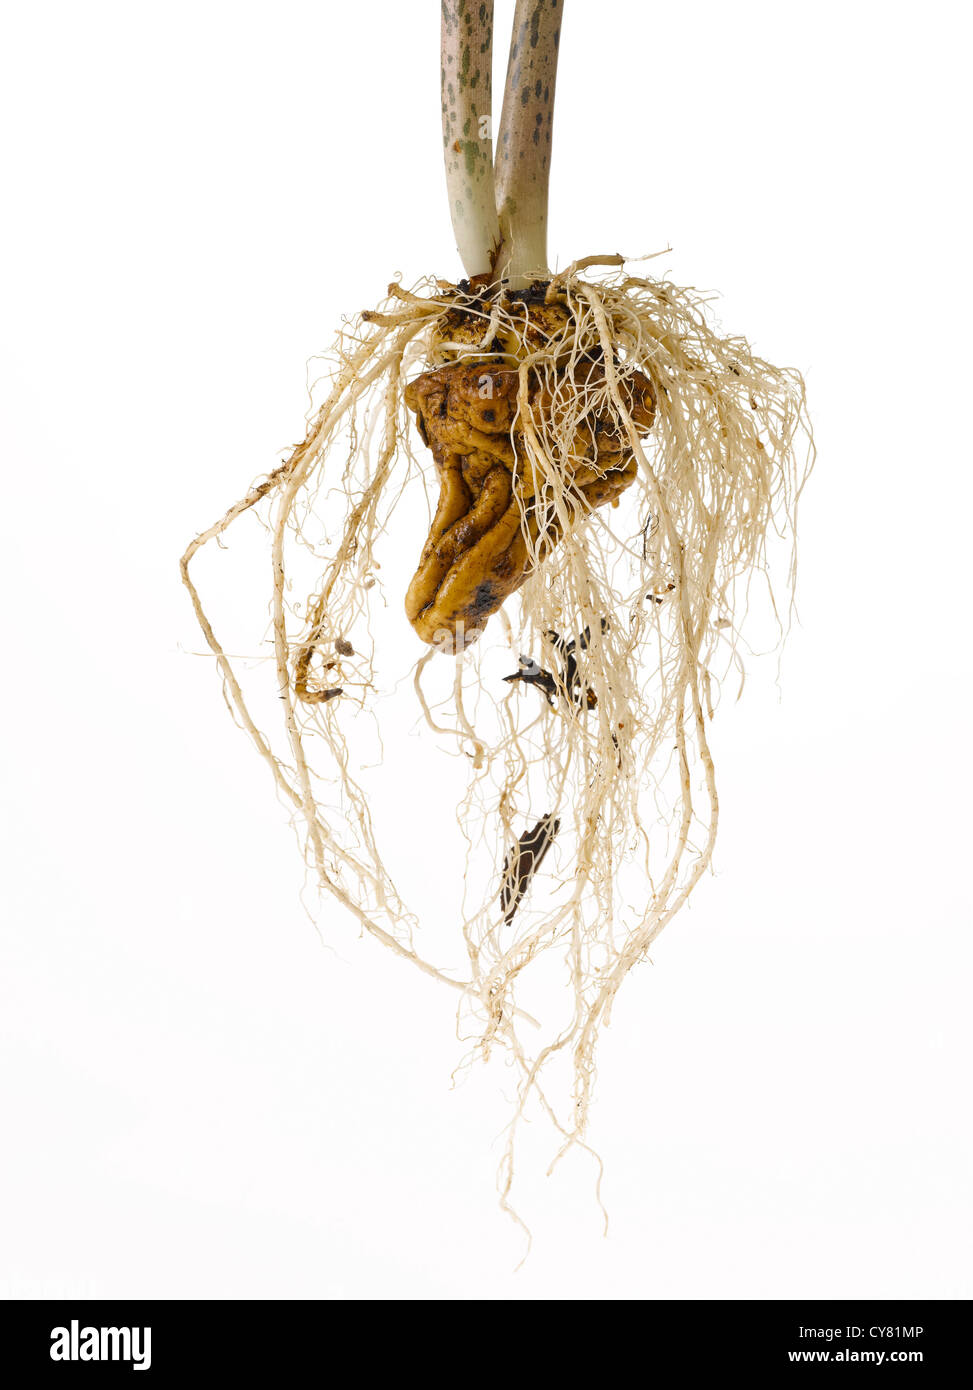 Konjak Root and Stem Stock Photo